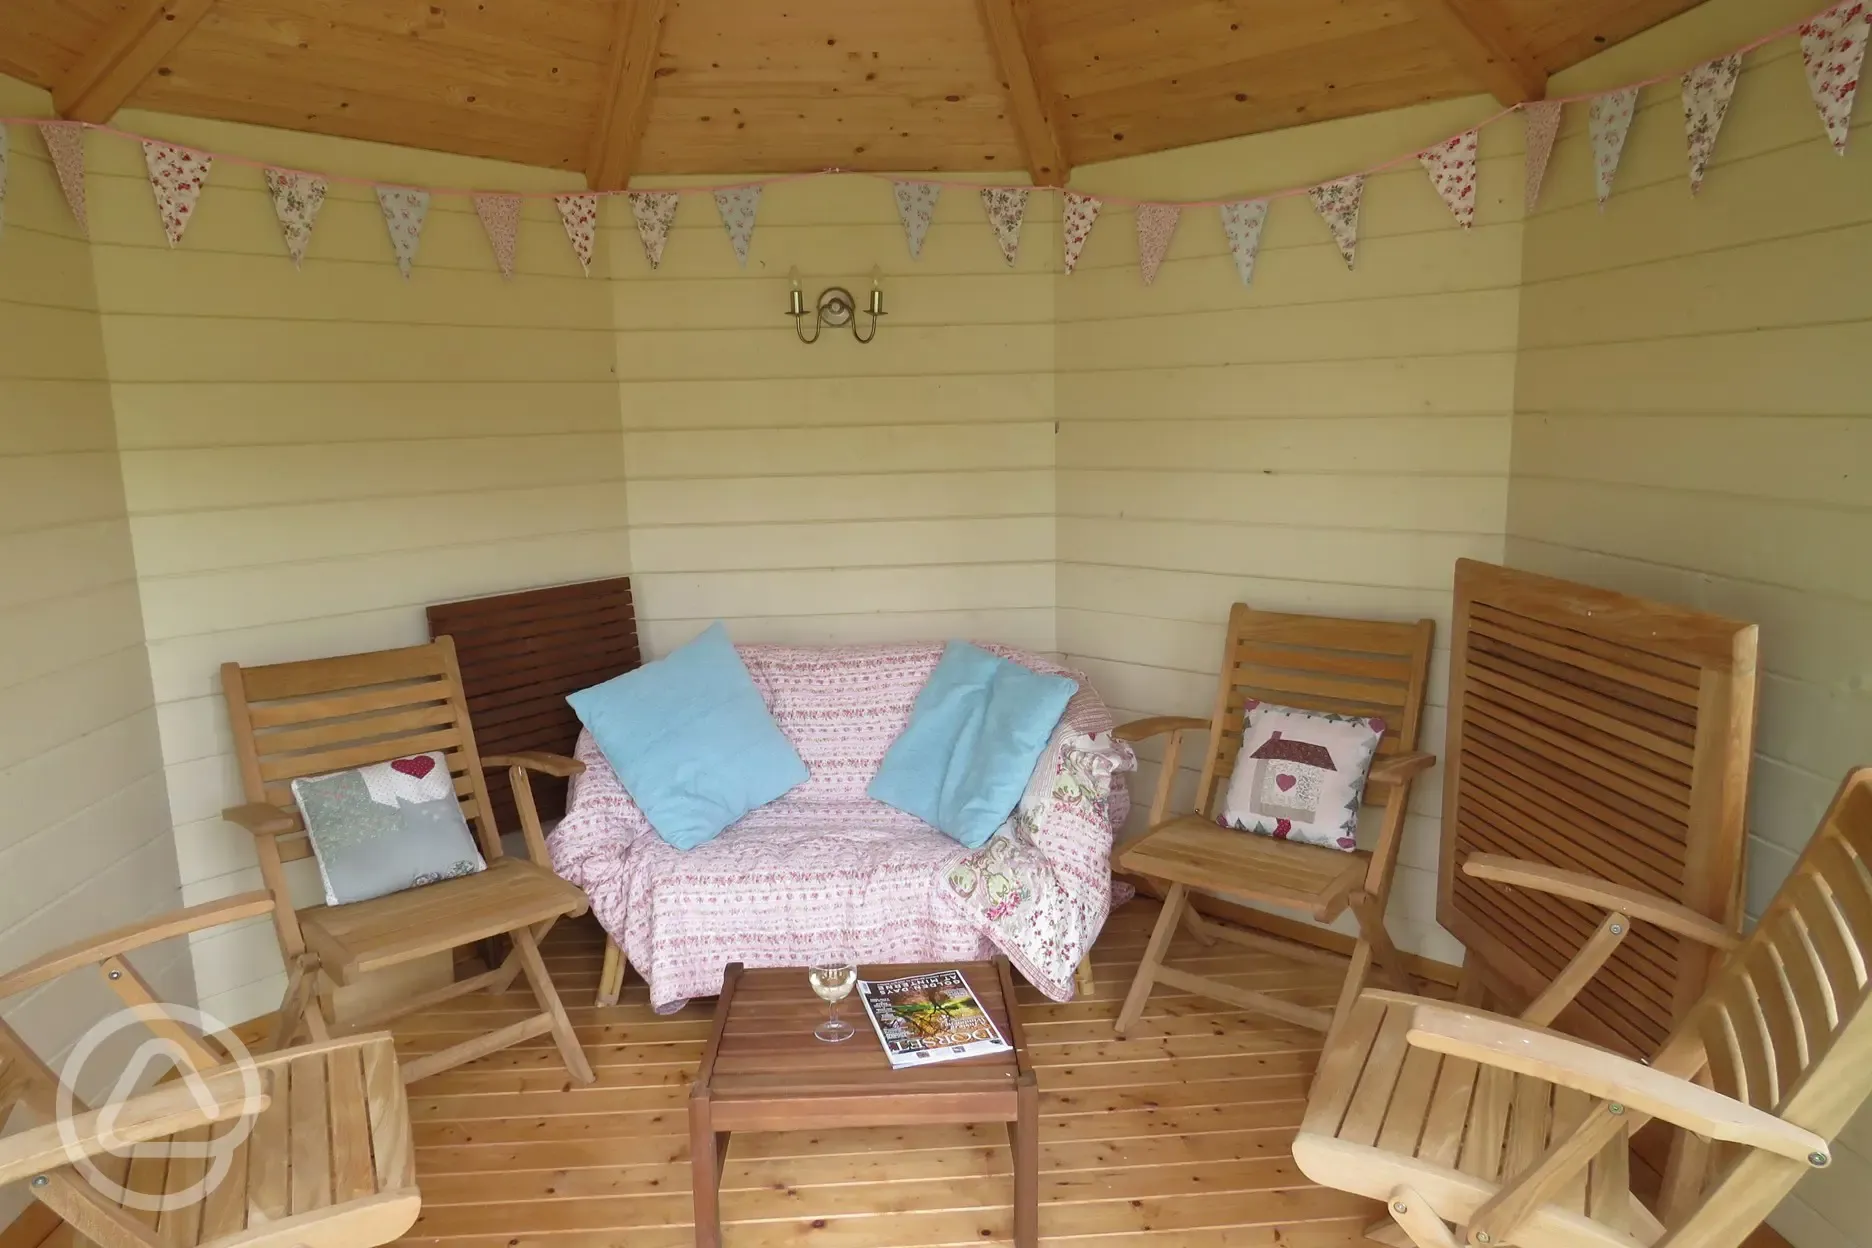 Our summer house is a great space to relax when the children are tucked up in bed